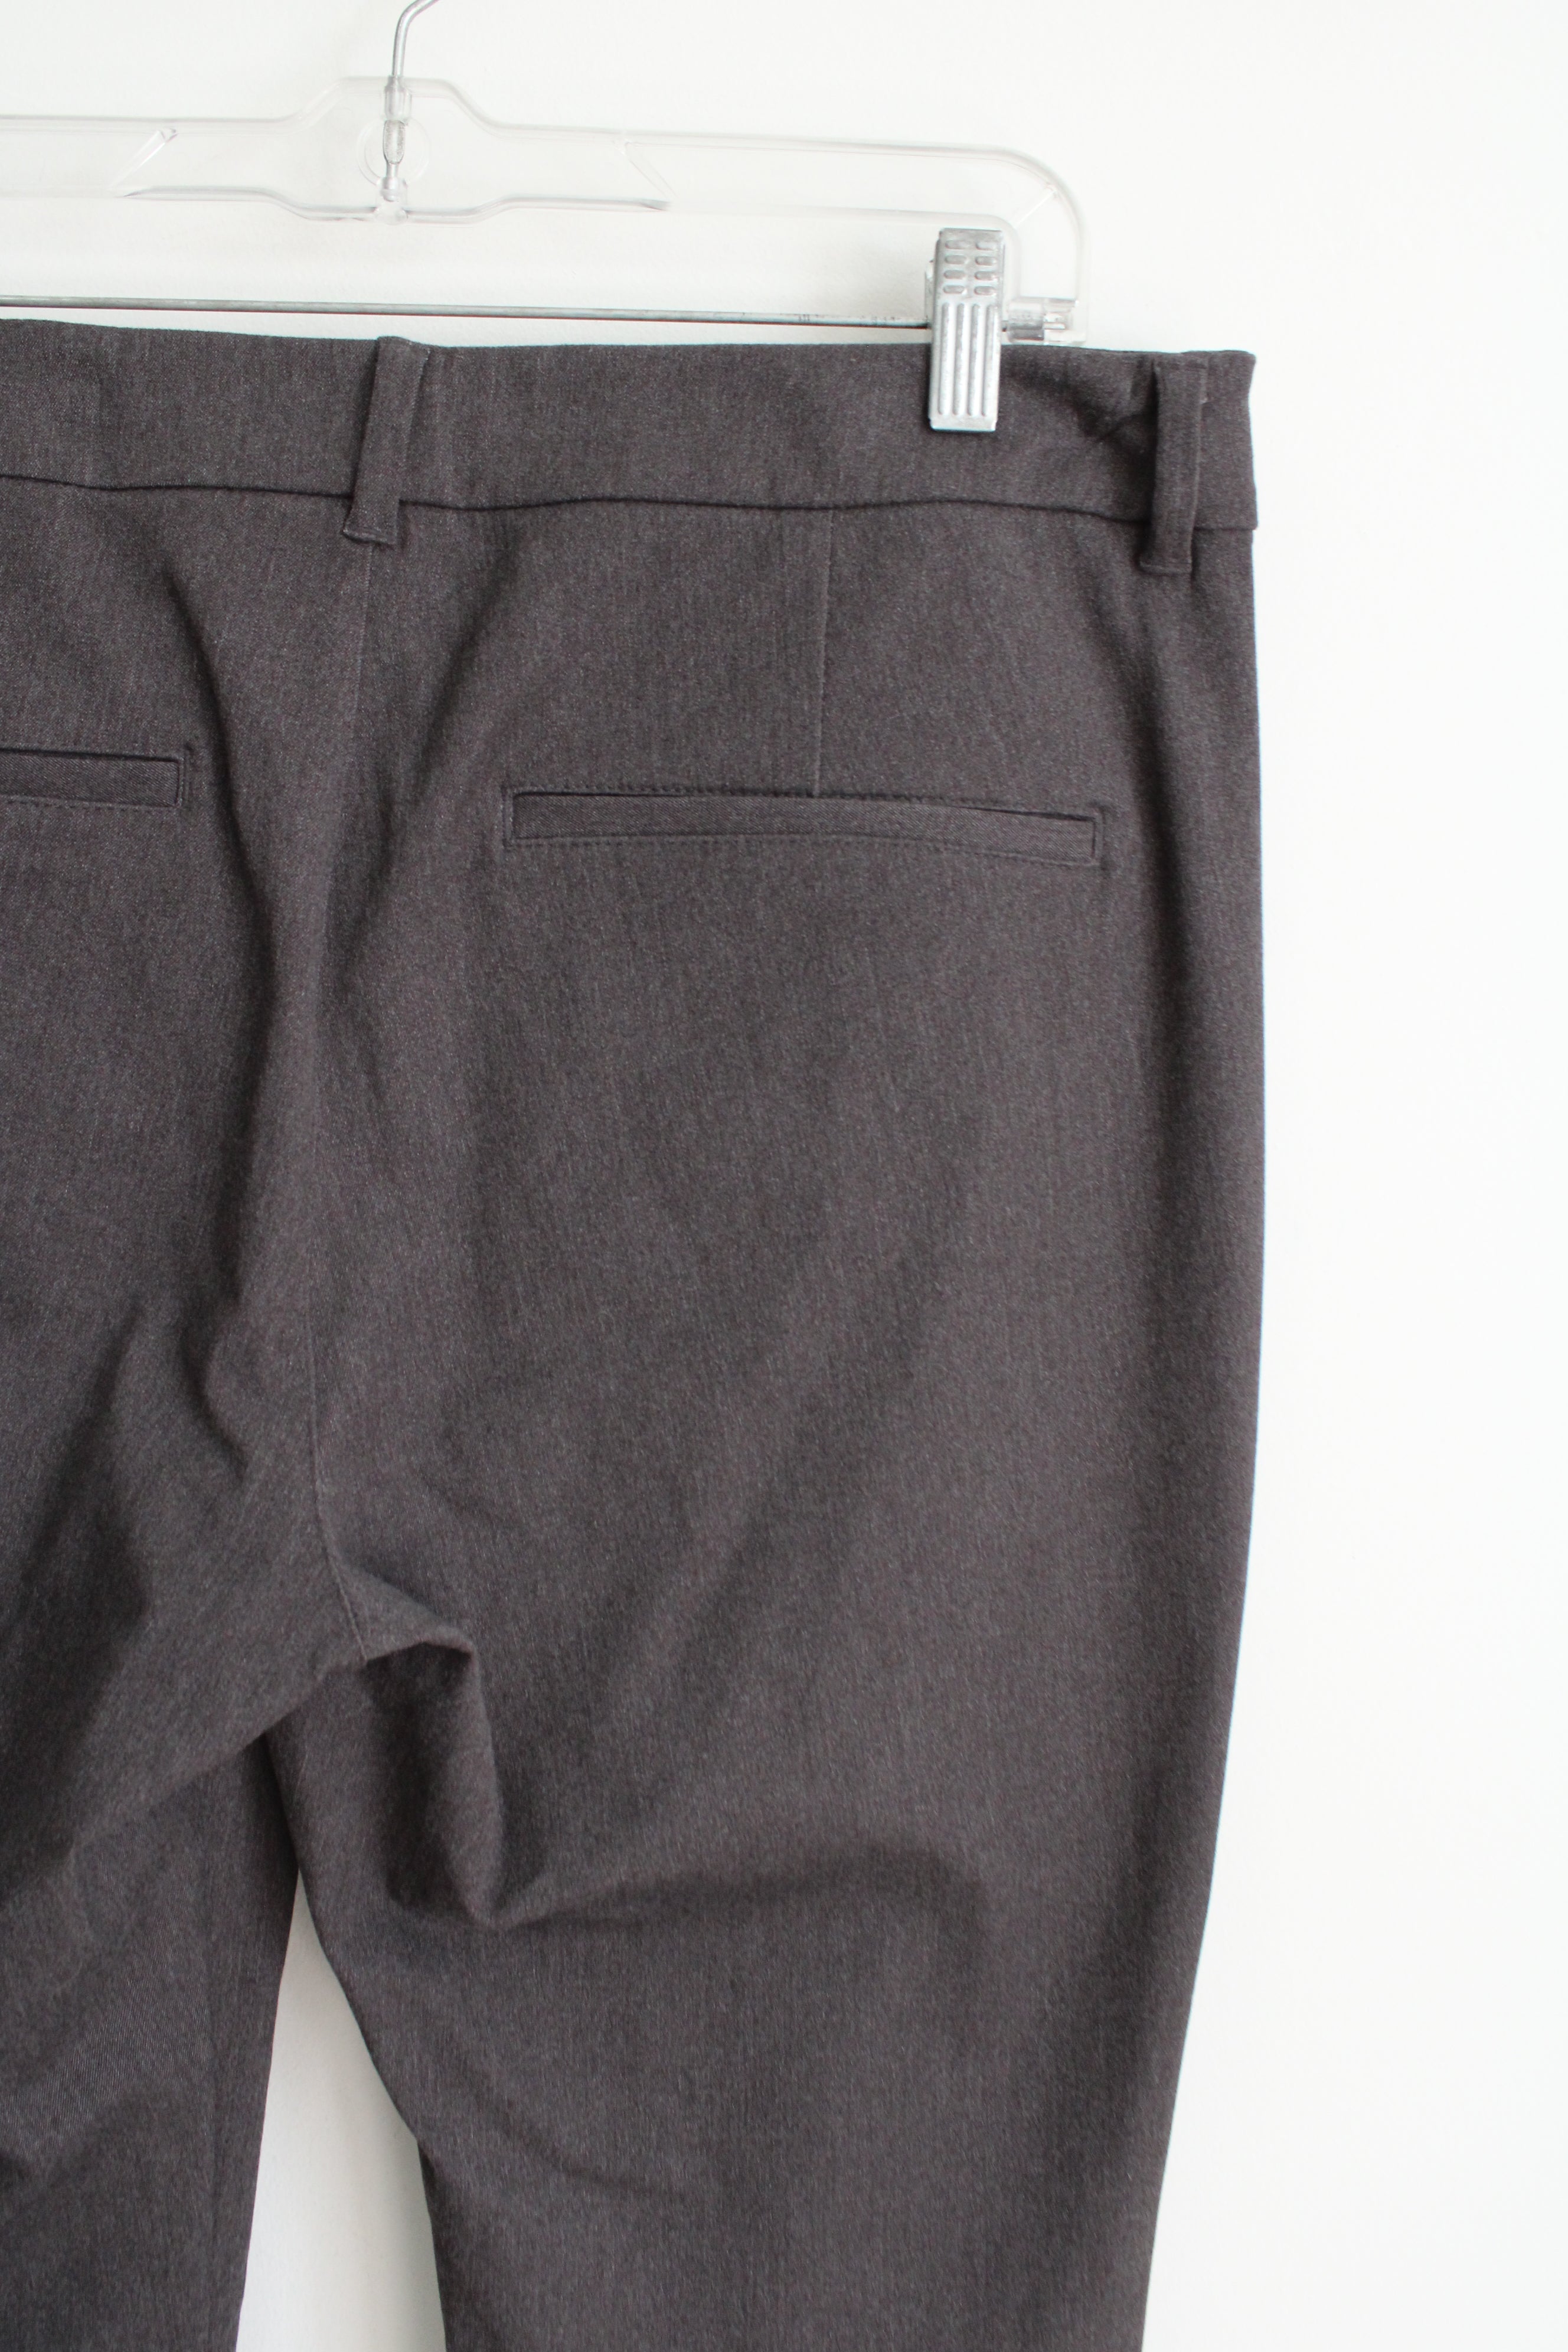 Old Navy Pixie High Rise Gray Pant | 12 Petite